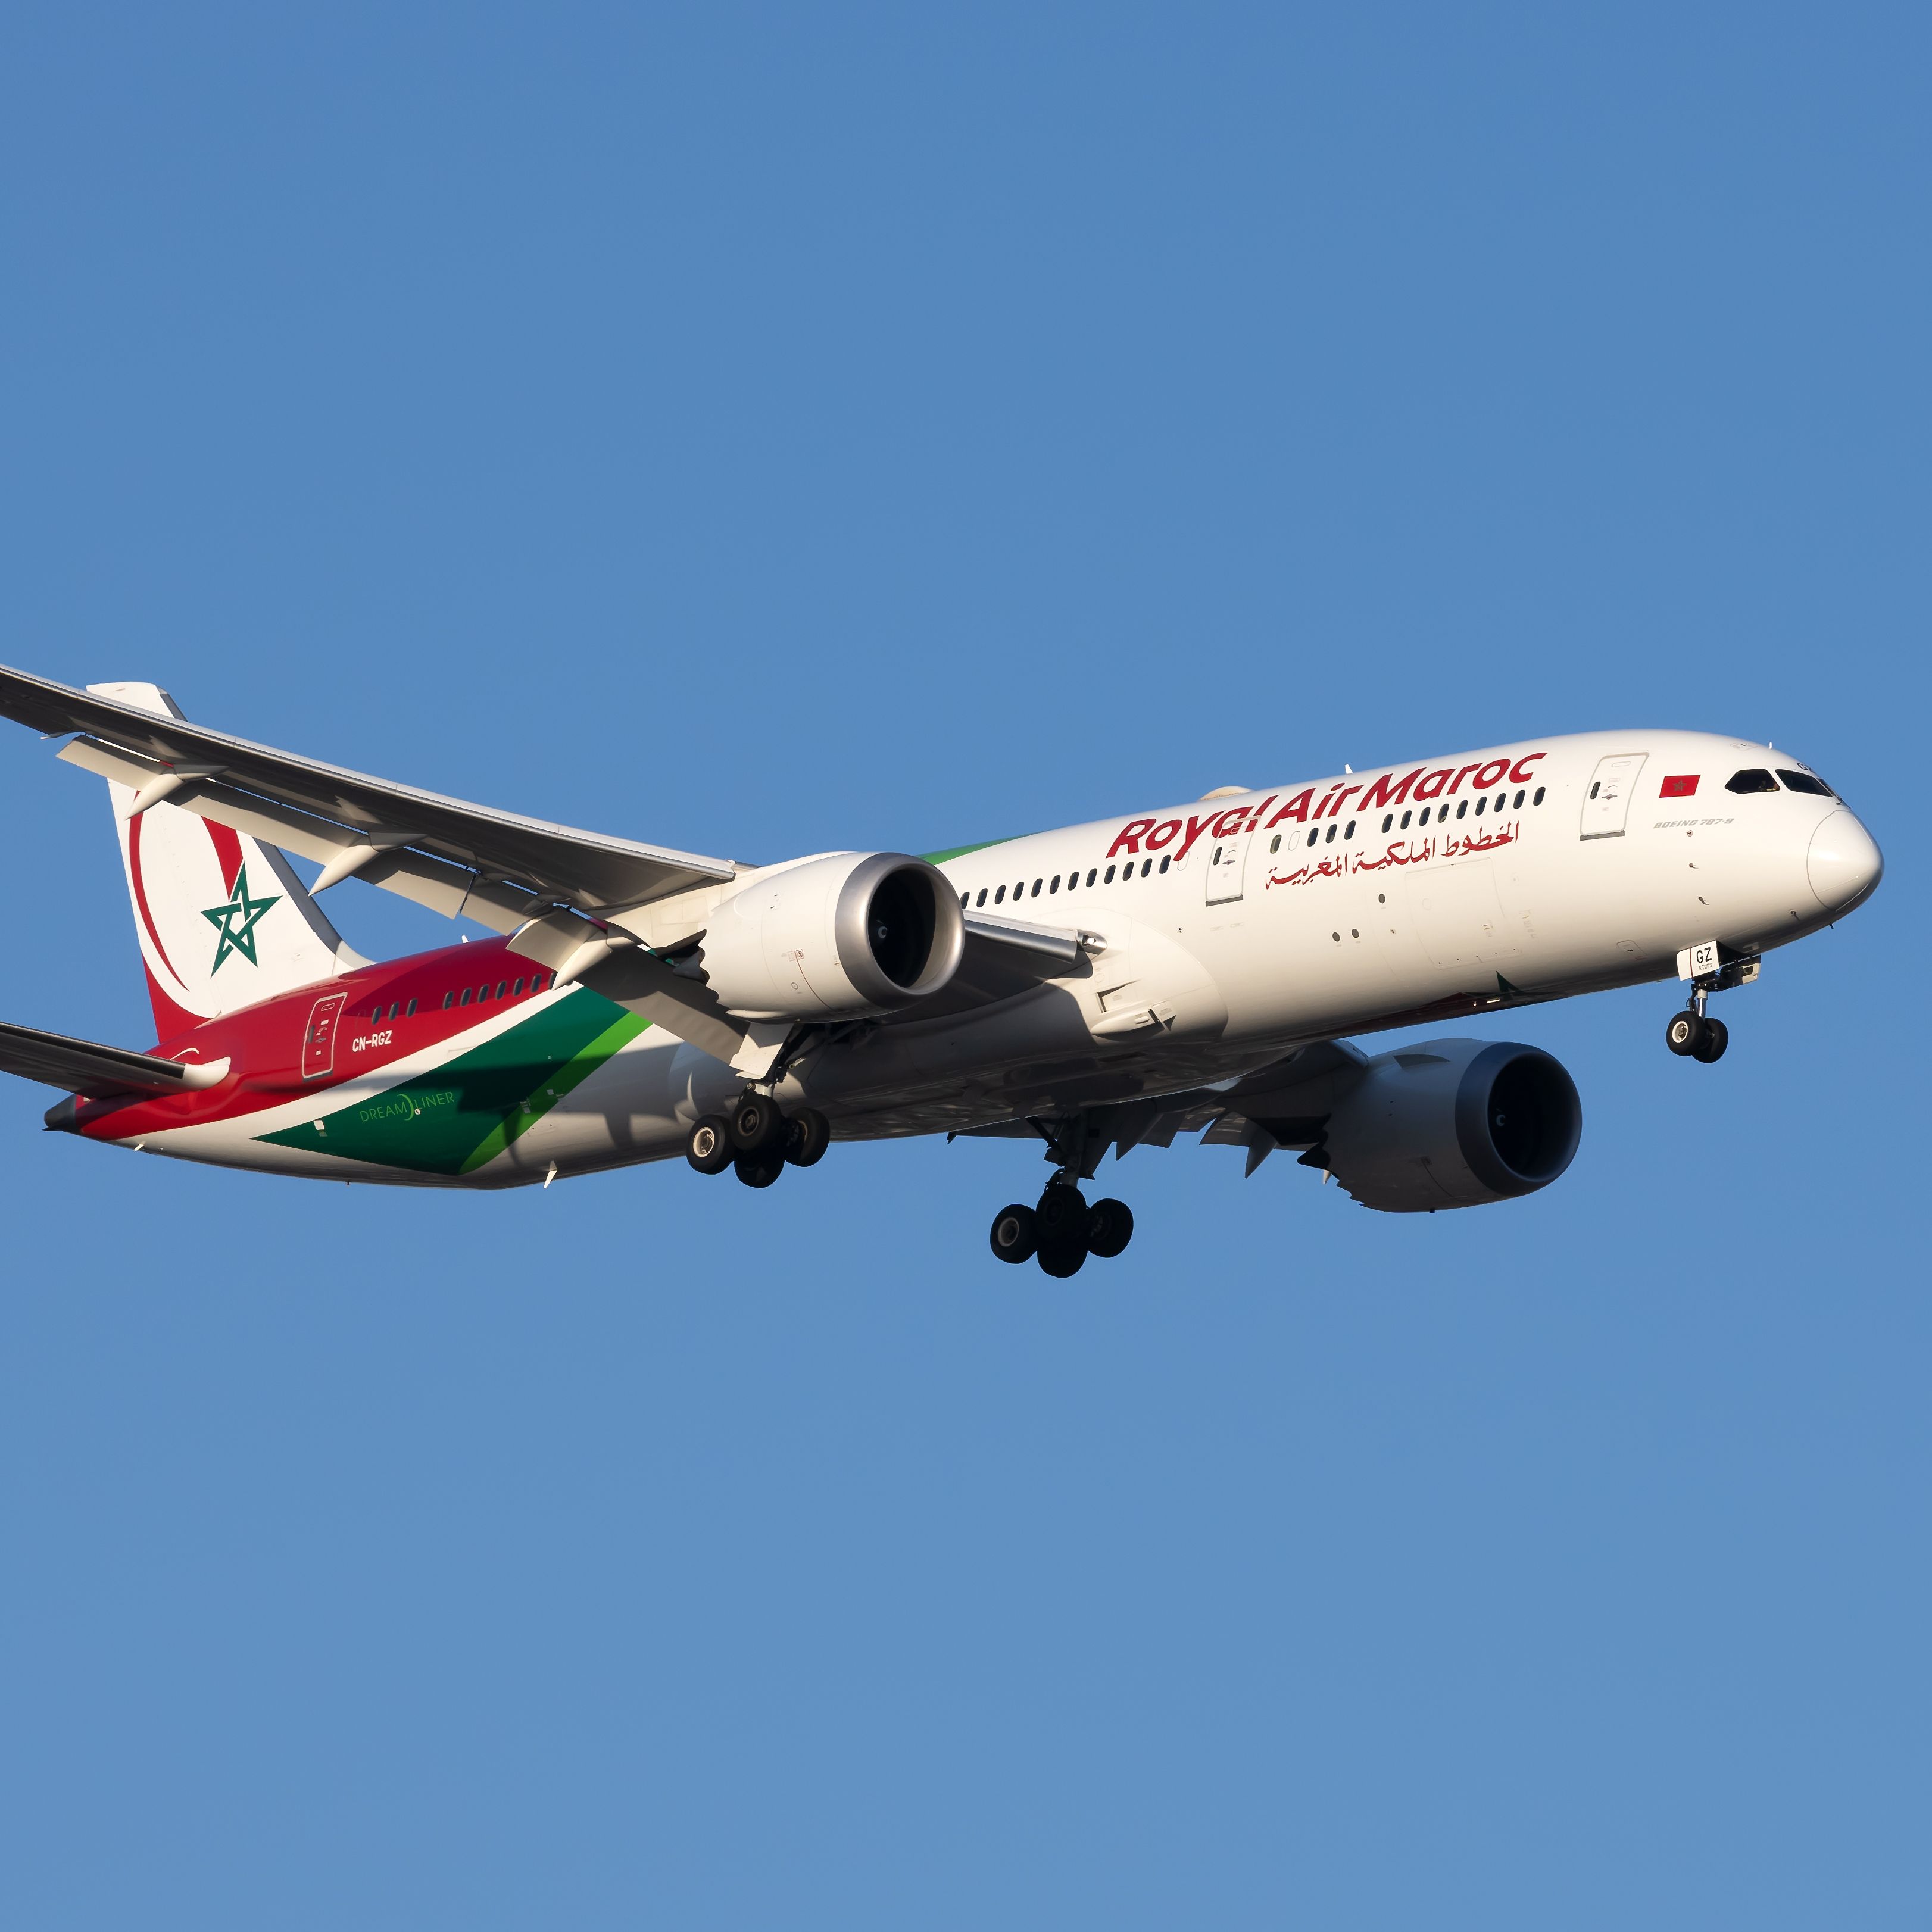 Royal Air Maroc Schedules 33,000 Seats For Moroccan Pilgrims Throughout Hajj